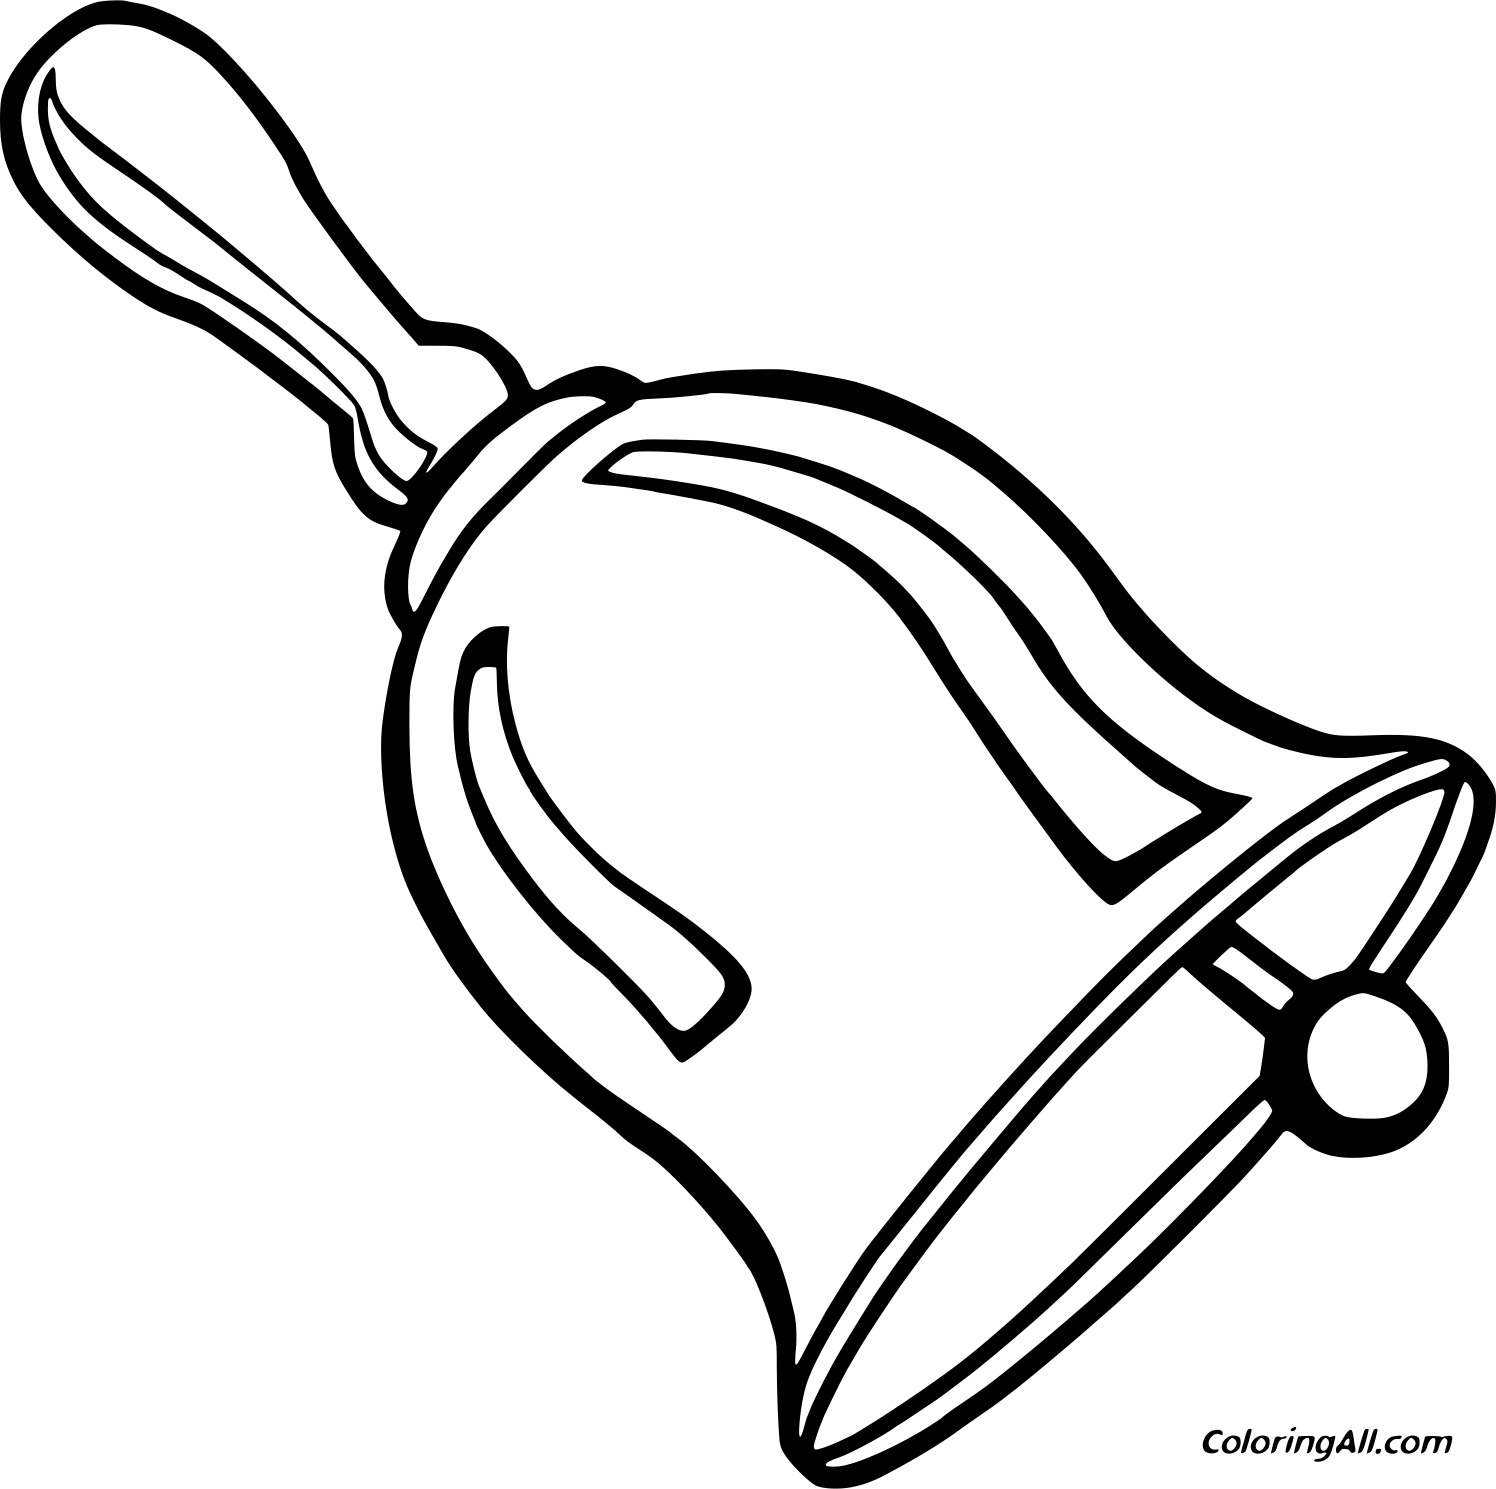 Shake The Bell Image For Kids Coloring Page